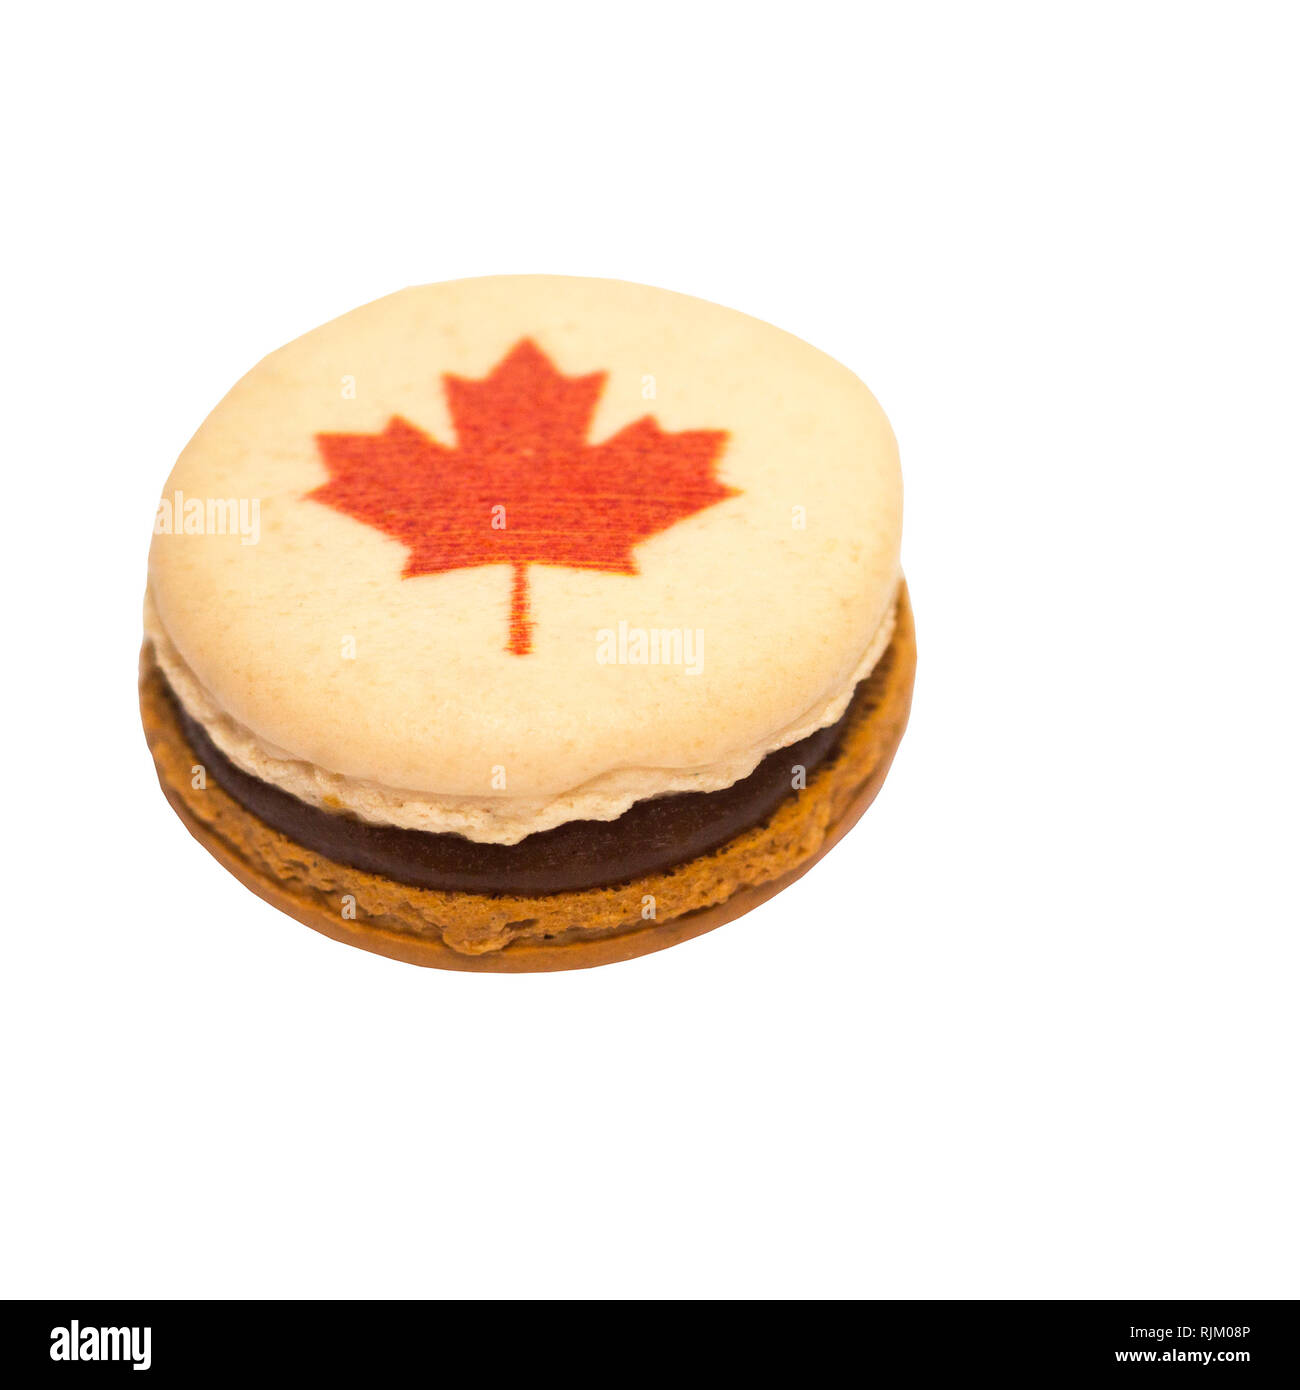 Macaron decorated with red maple leaf made for Canada Day Stock Photo